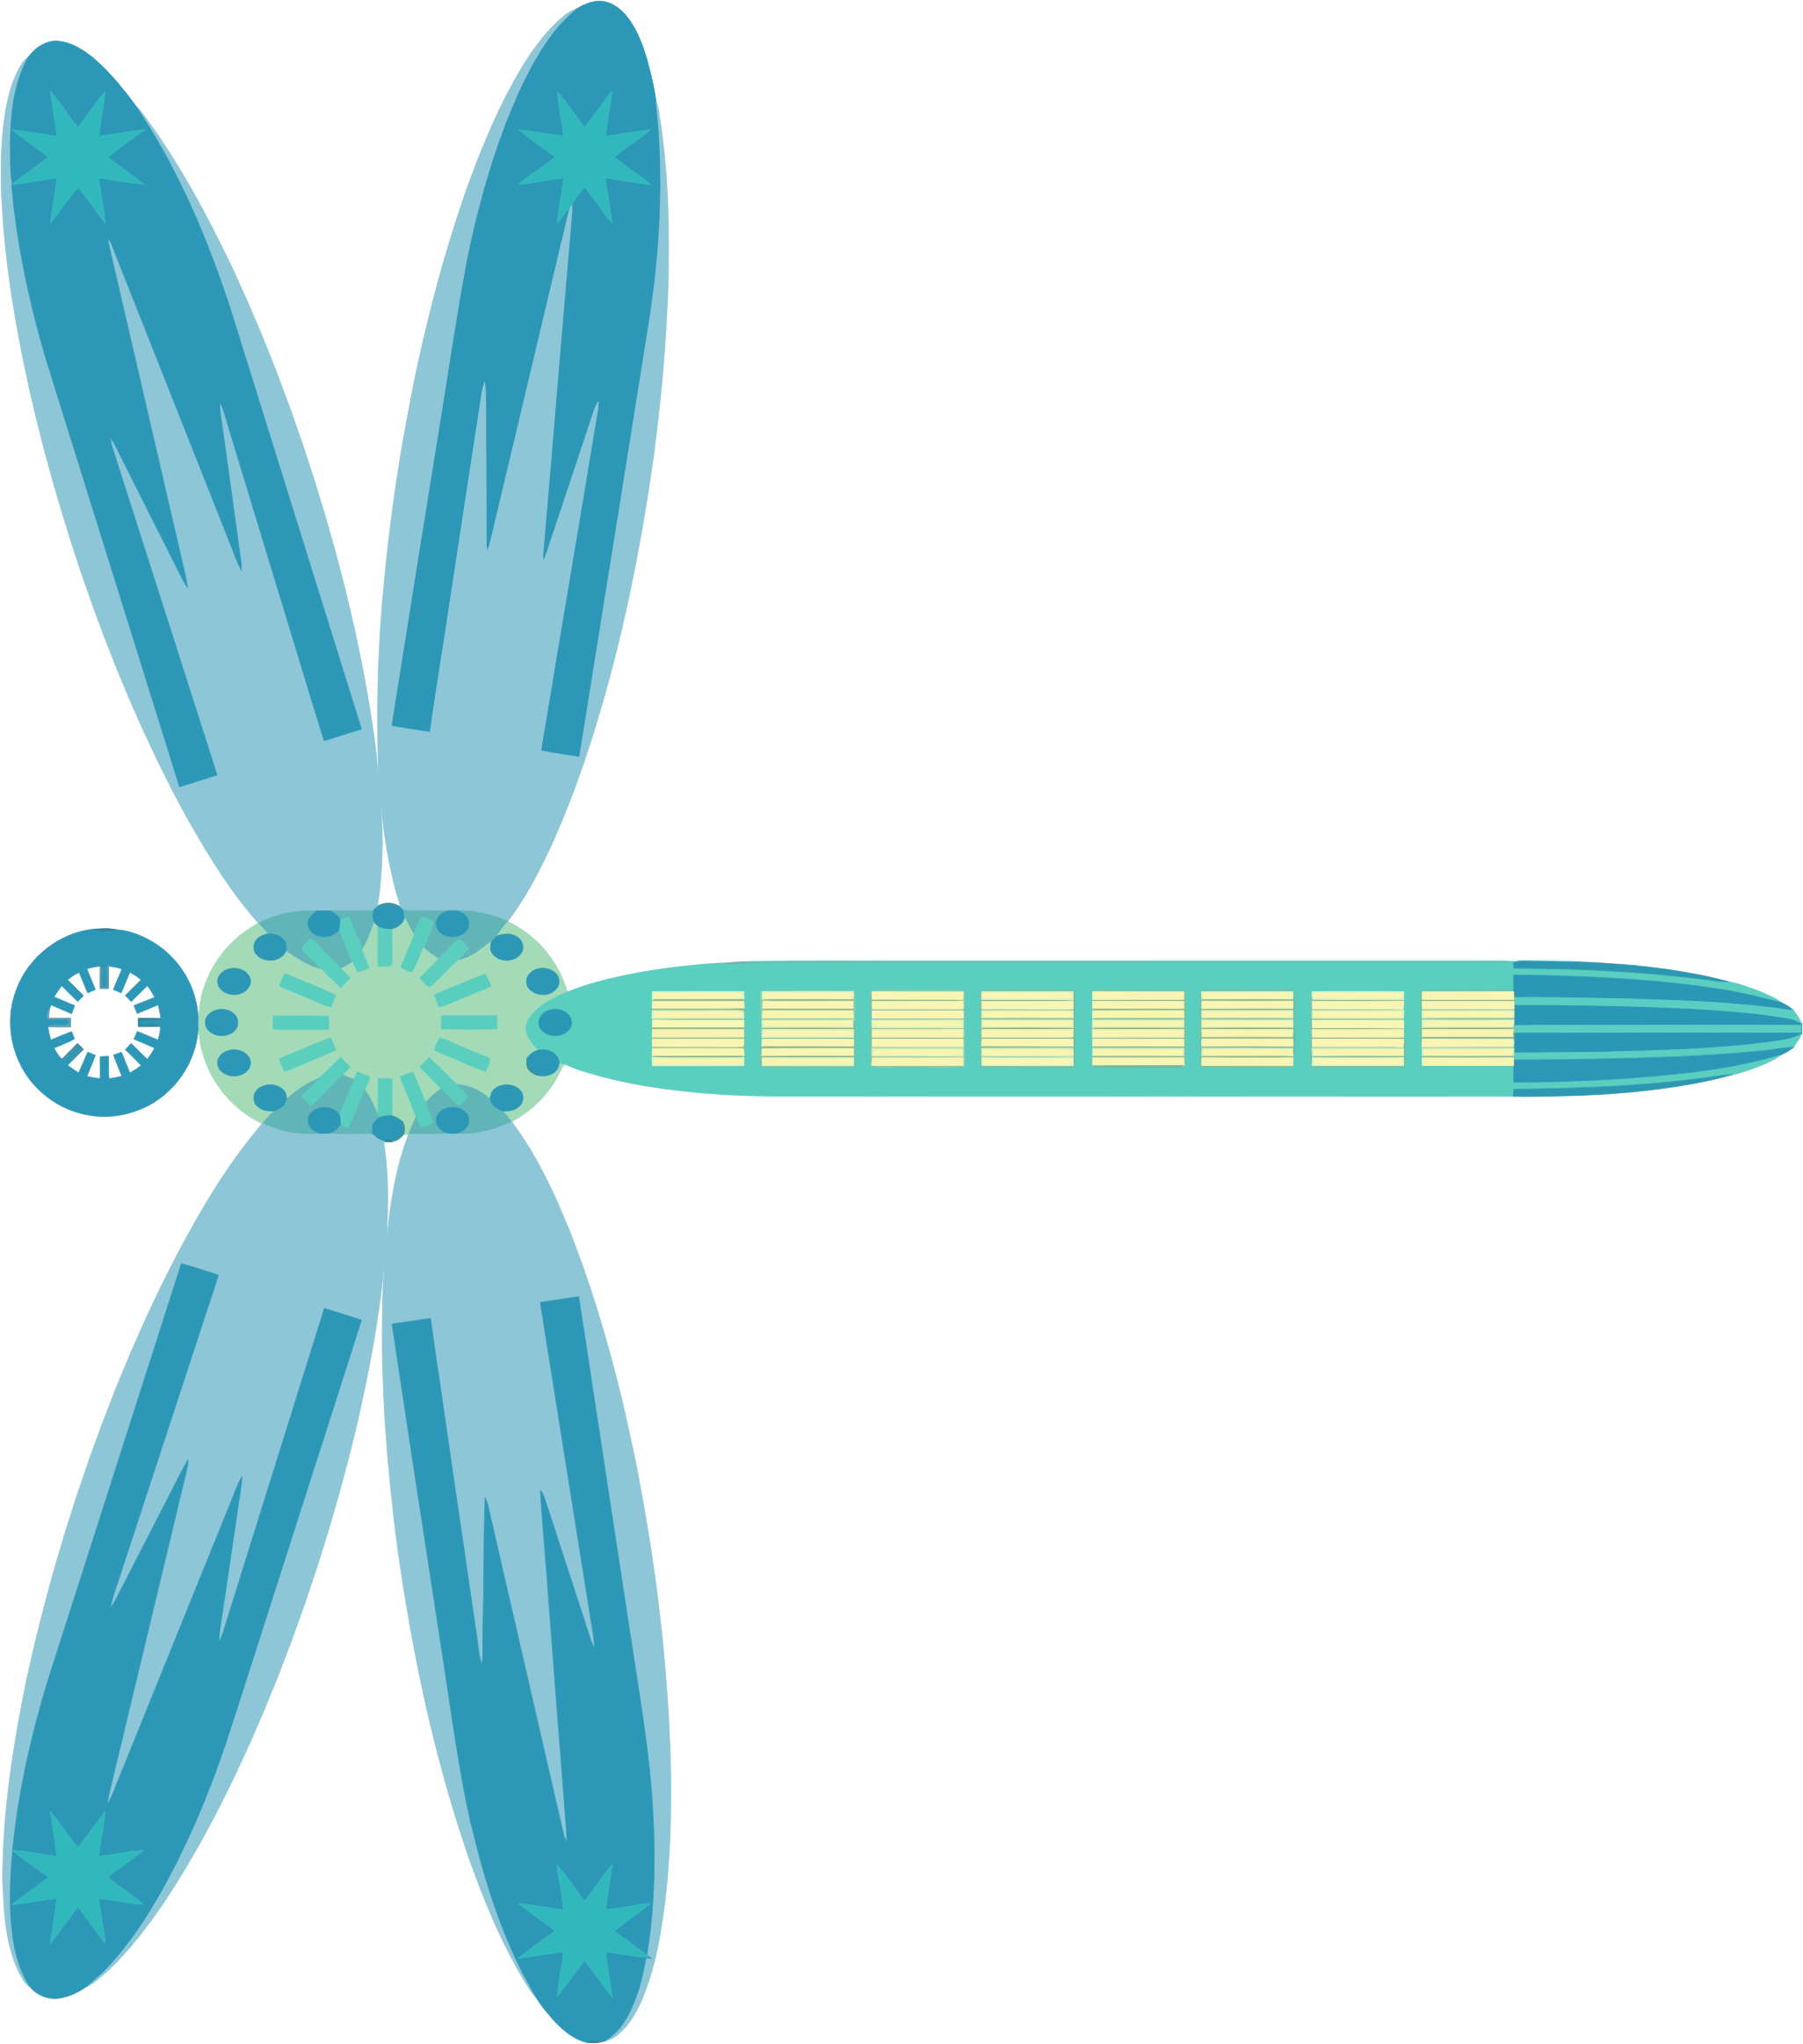 Abstract big image png. Dragonfly clipart turquoise